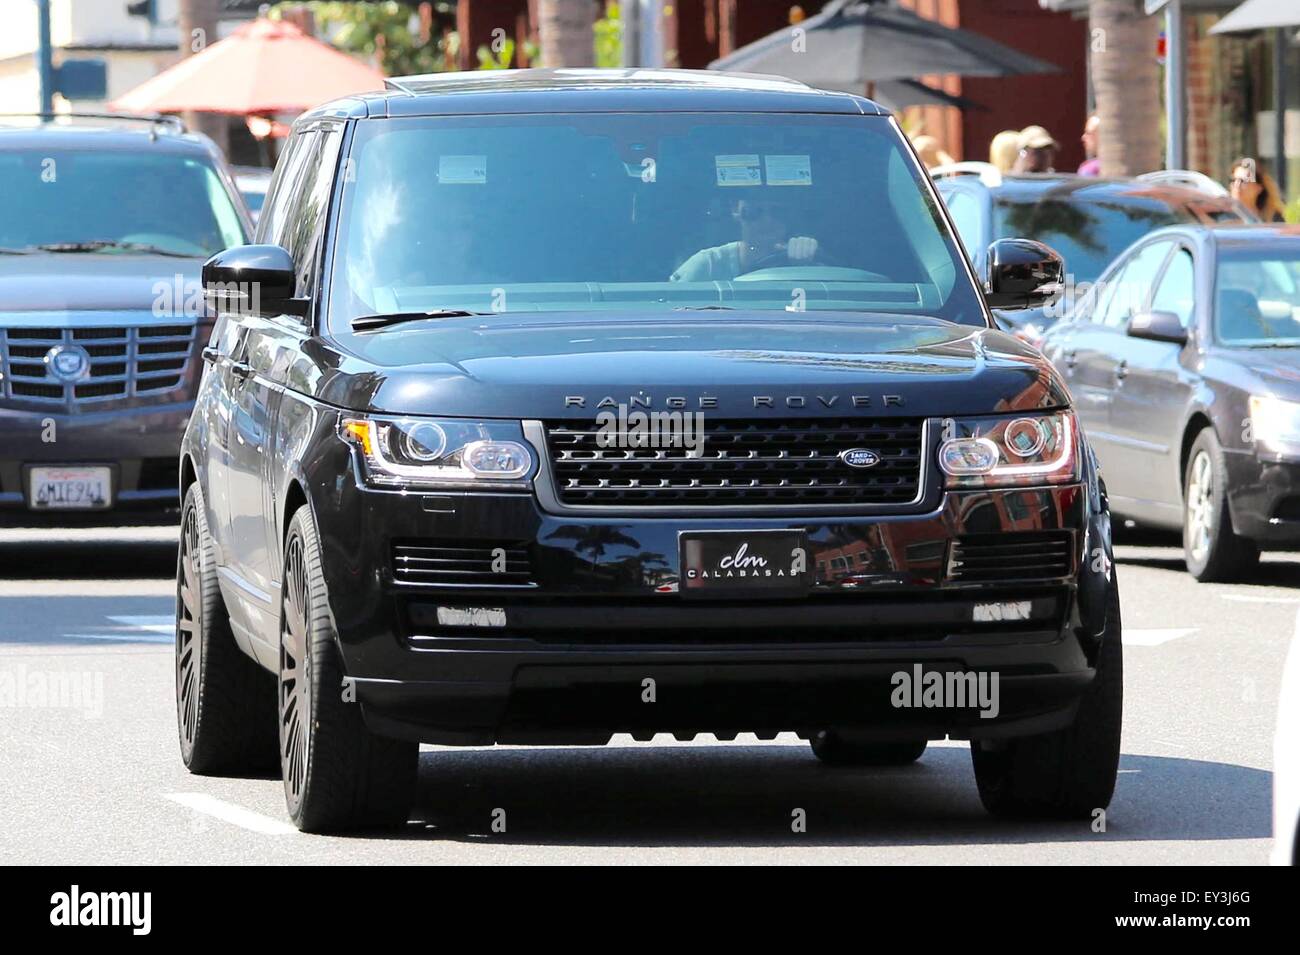 Kendall Jenner Driving Her Range Rover Car In Beverly Hills Featuring Kendall Jenner Where Los